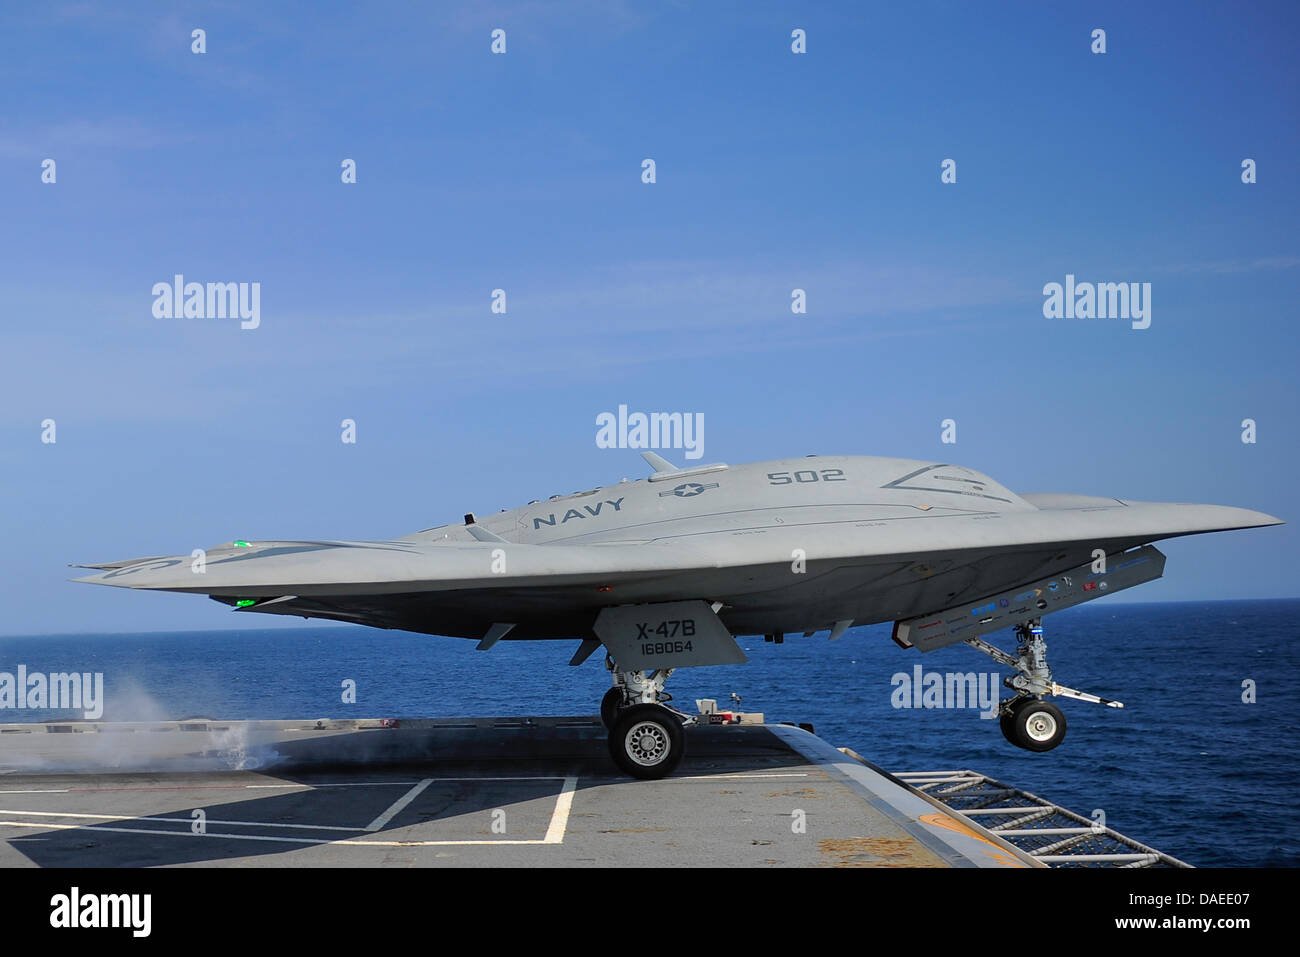 A US Navy X-47B unmanned combat air system drone launches from the flight deck of the aircraft carrier USS George H.W. Bush July 10, 2013 operating in the Atlantic Ocean. The landing marked the first time an unmanned aircraft completed an arrested landing at sea. Stock Photo